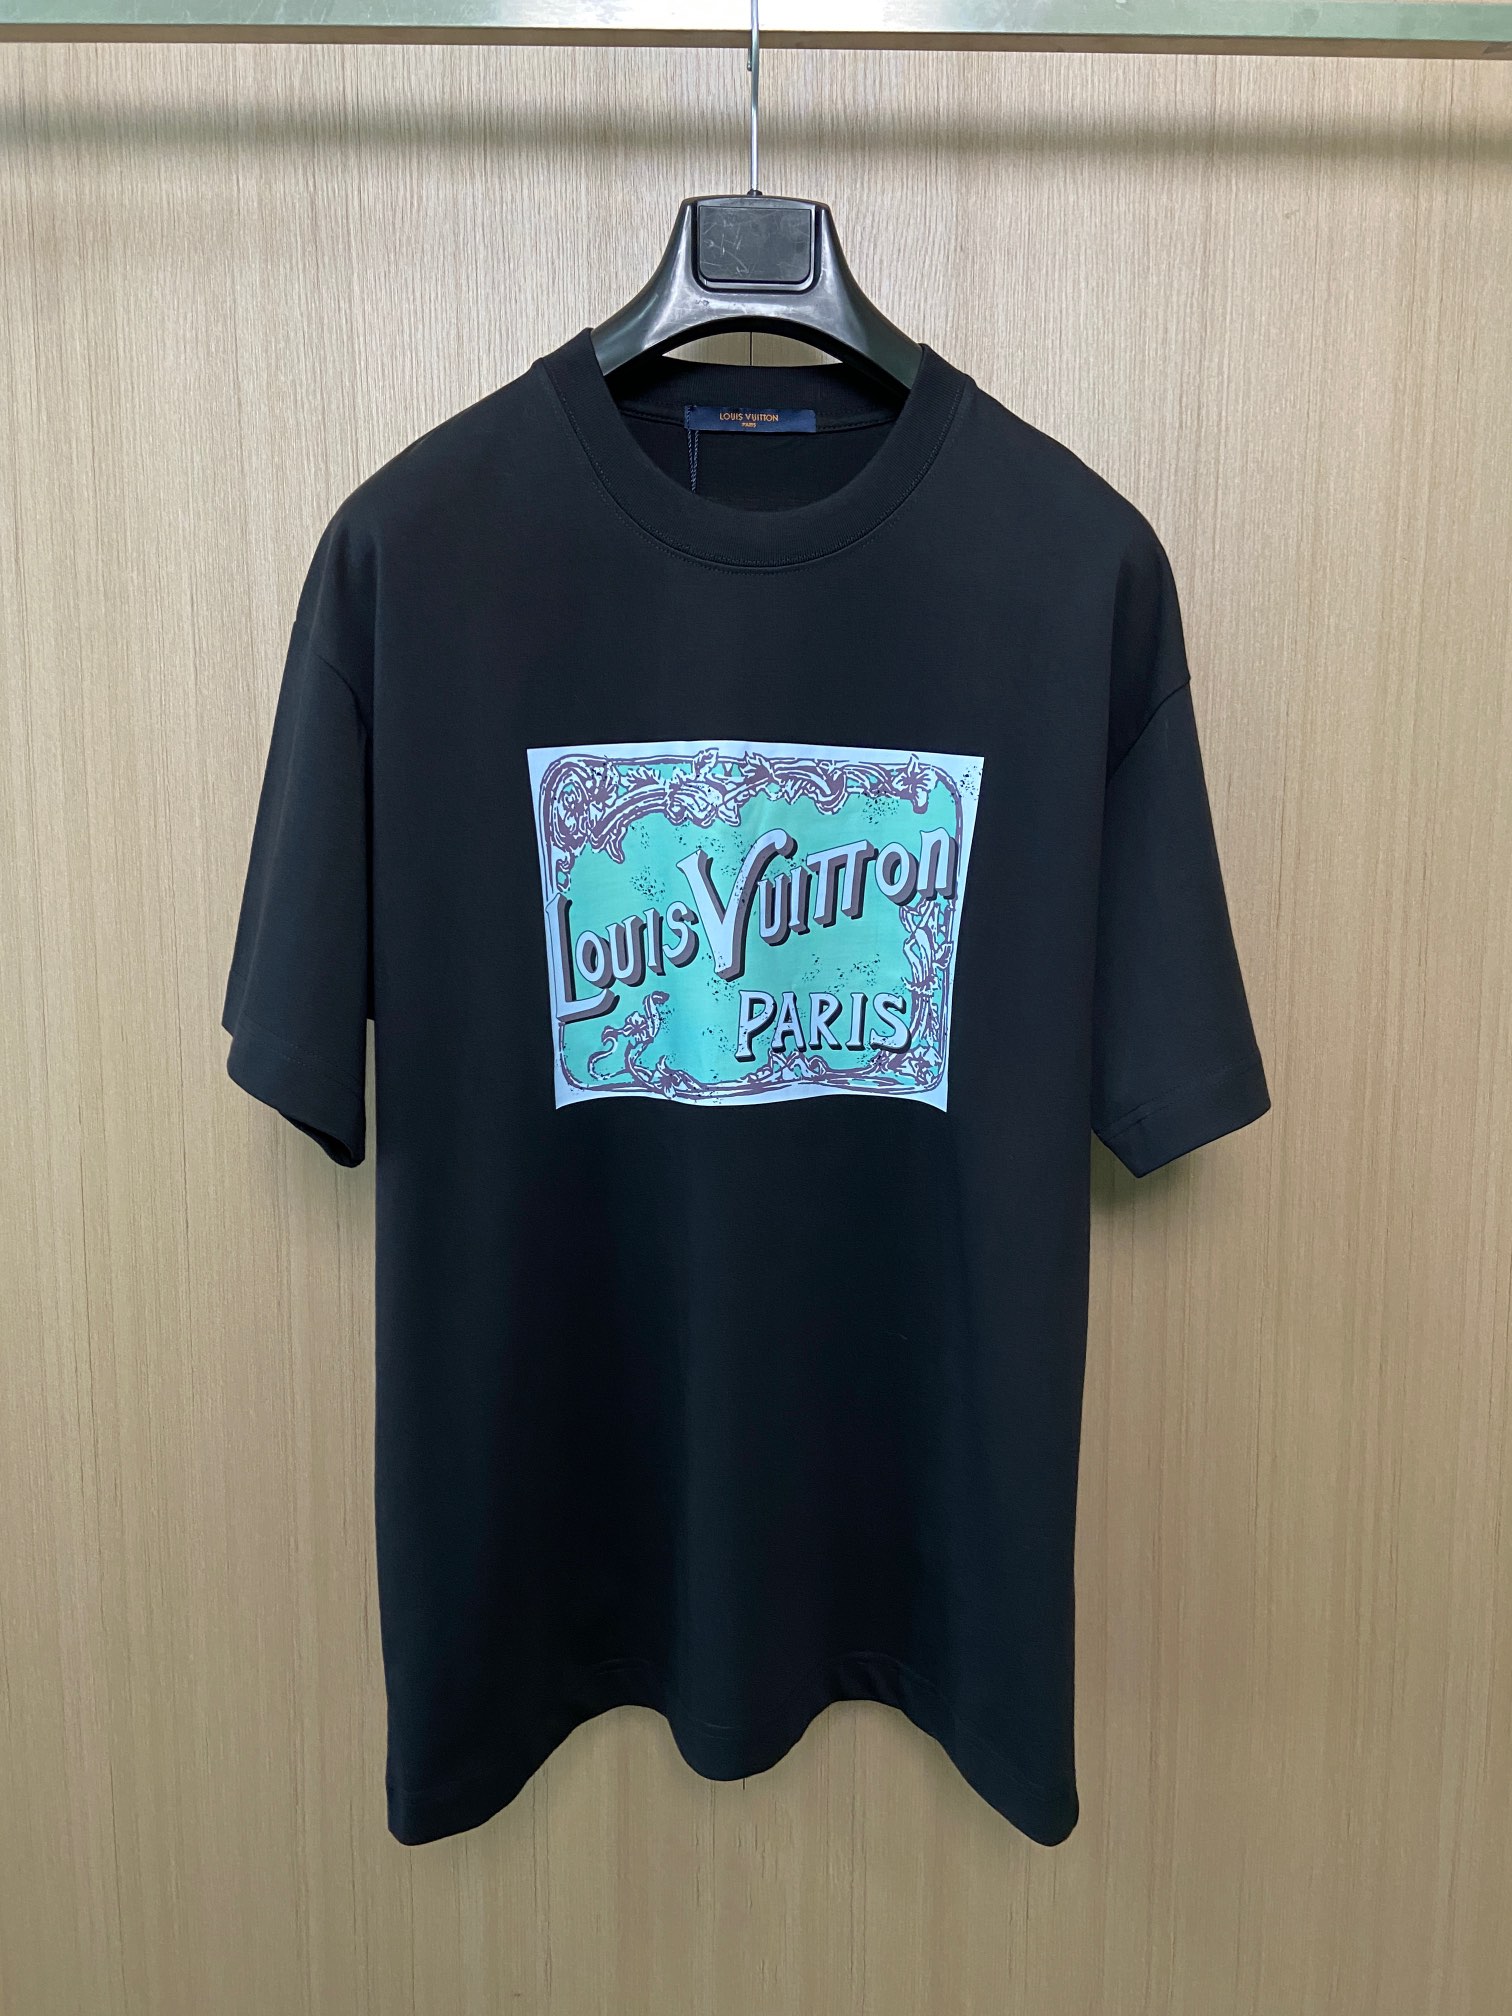 Louis Vuitton Clothing T-Shirt Black Green White Printing Unisex Summer Collection Vintage